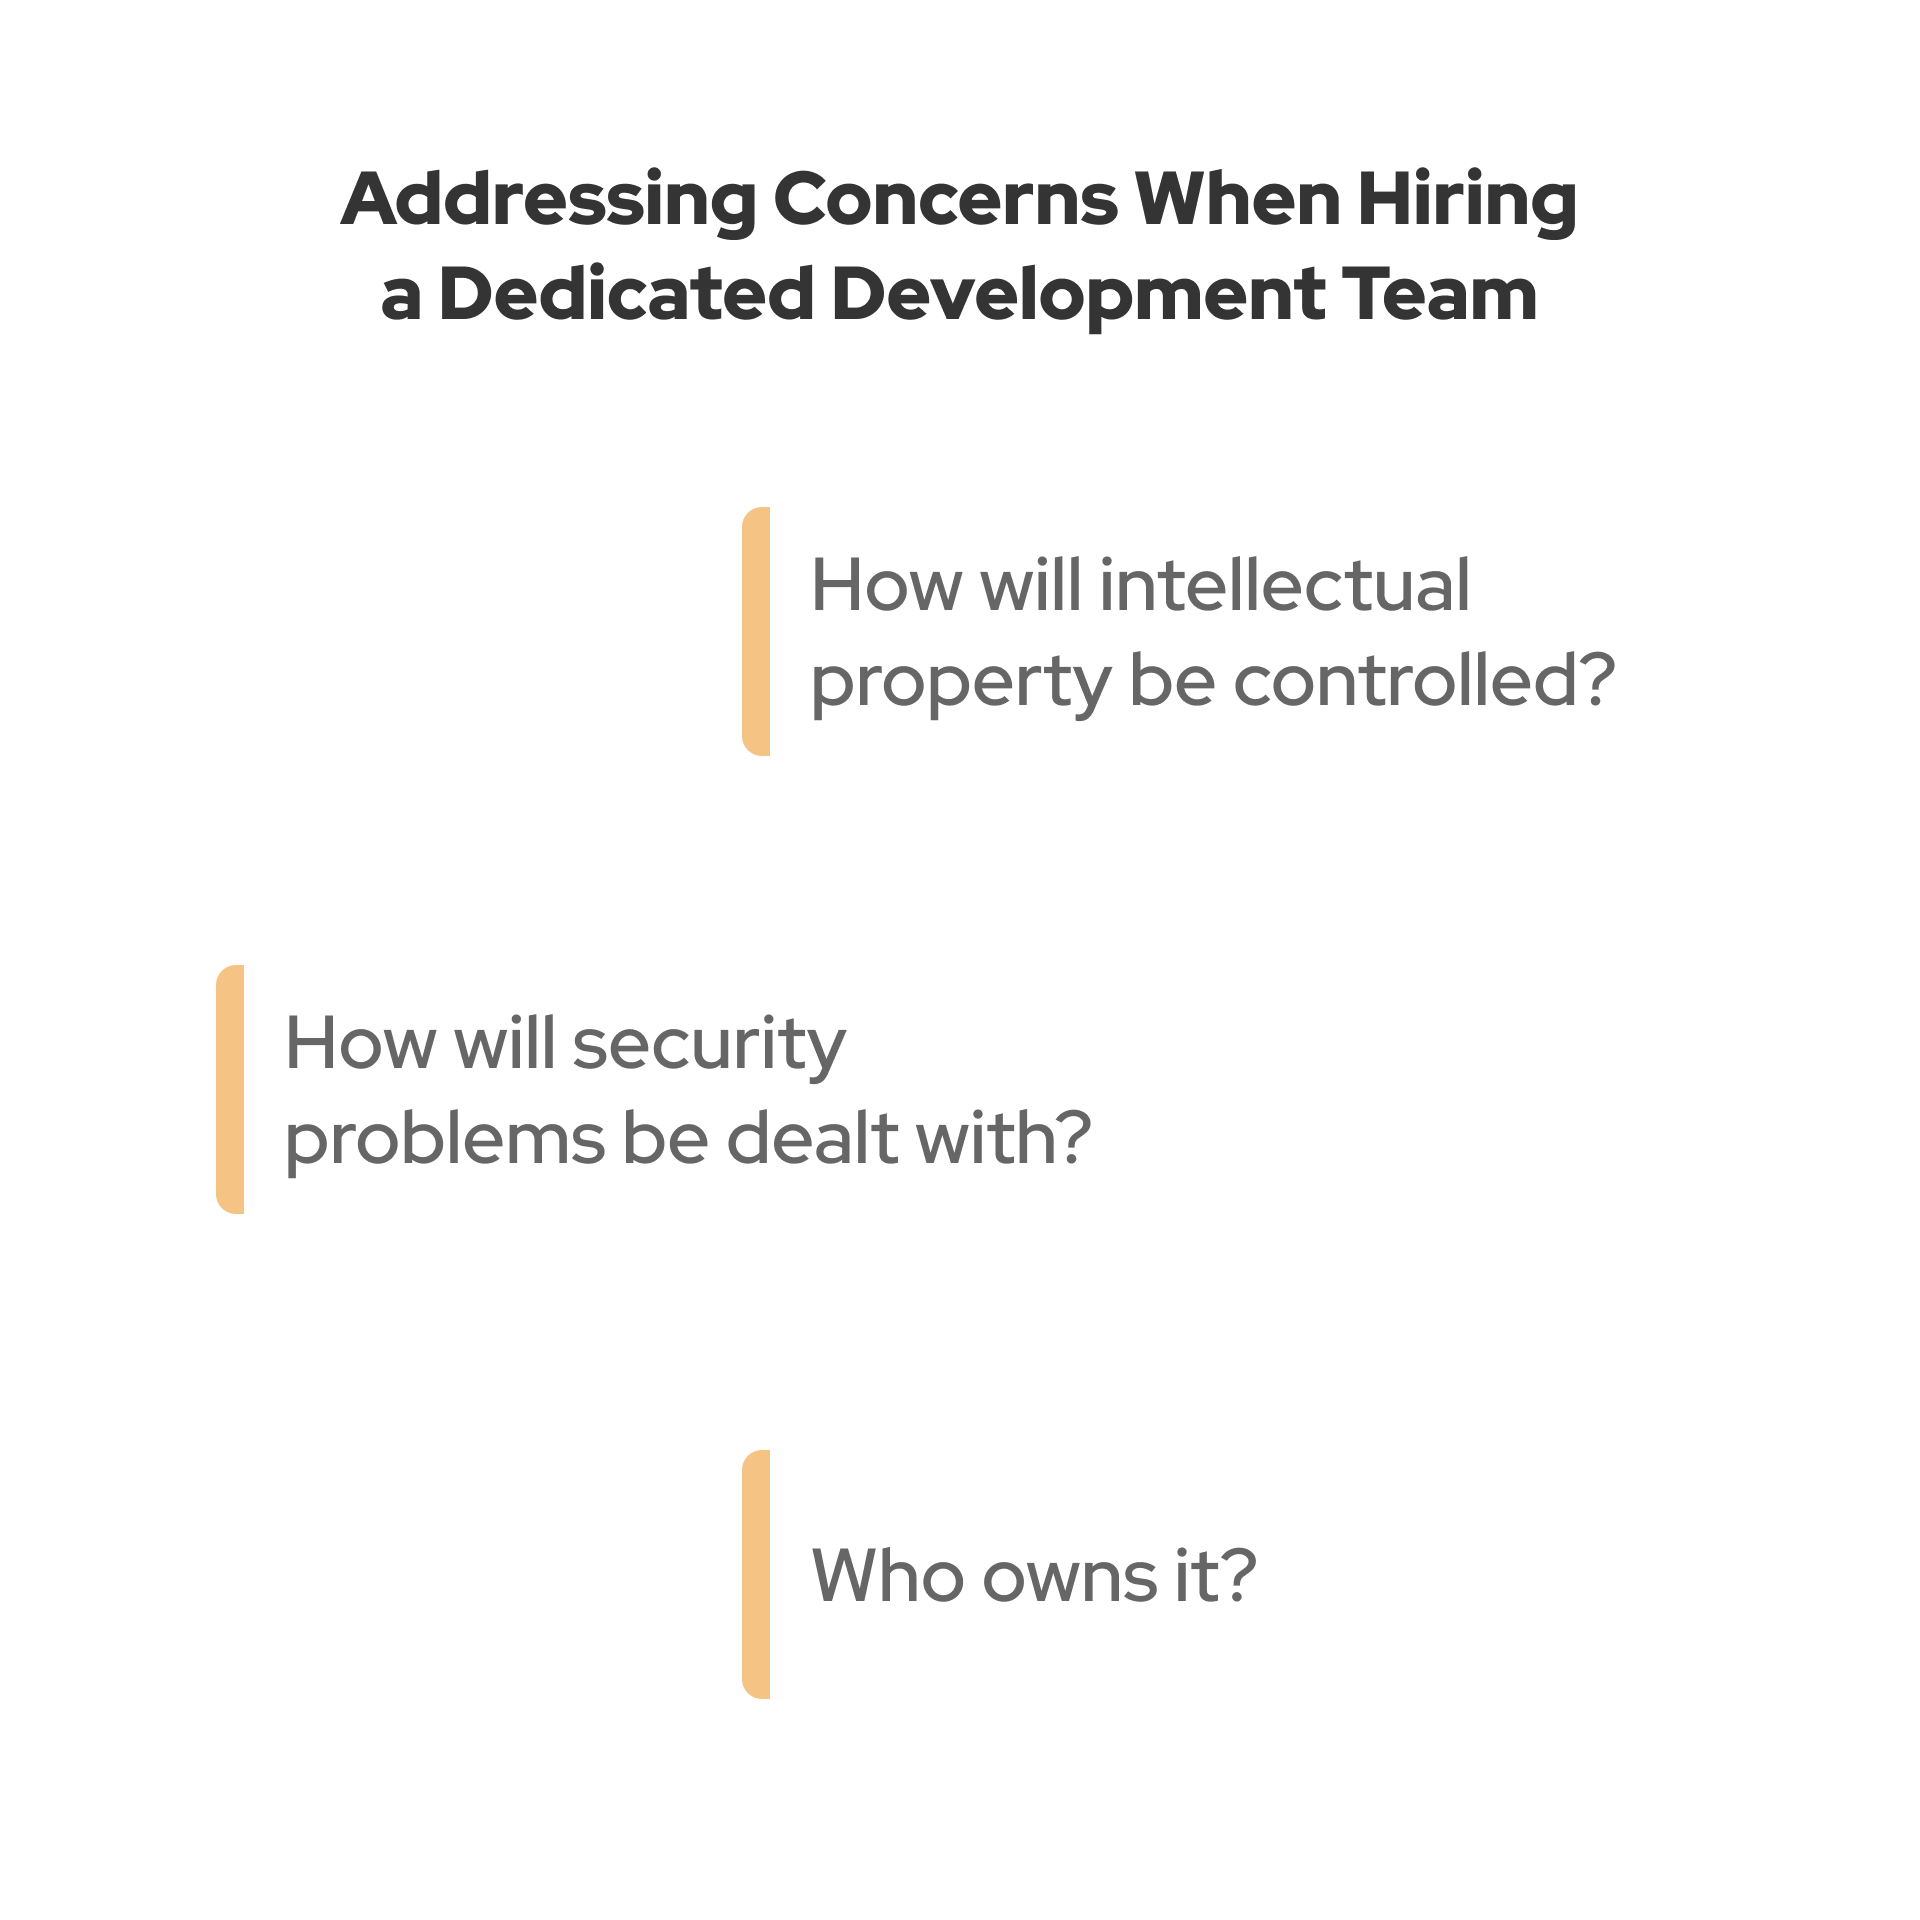 When considering a dedicated development team model, there are several important concerns to address: intellectual property (IP), security, and ownership.